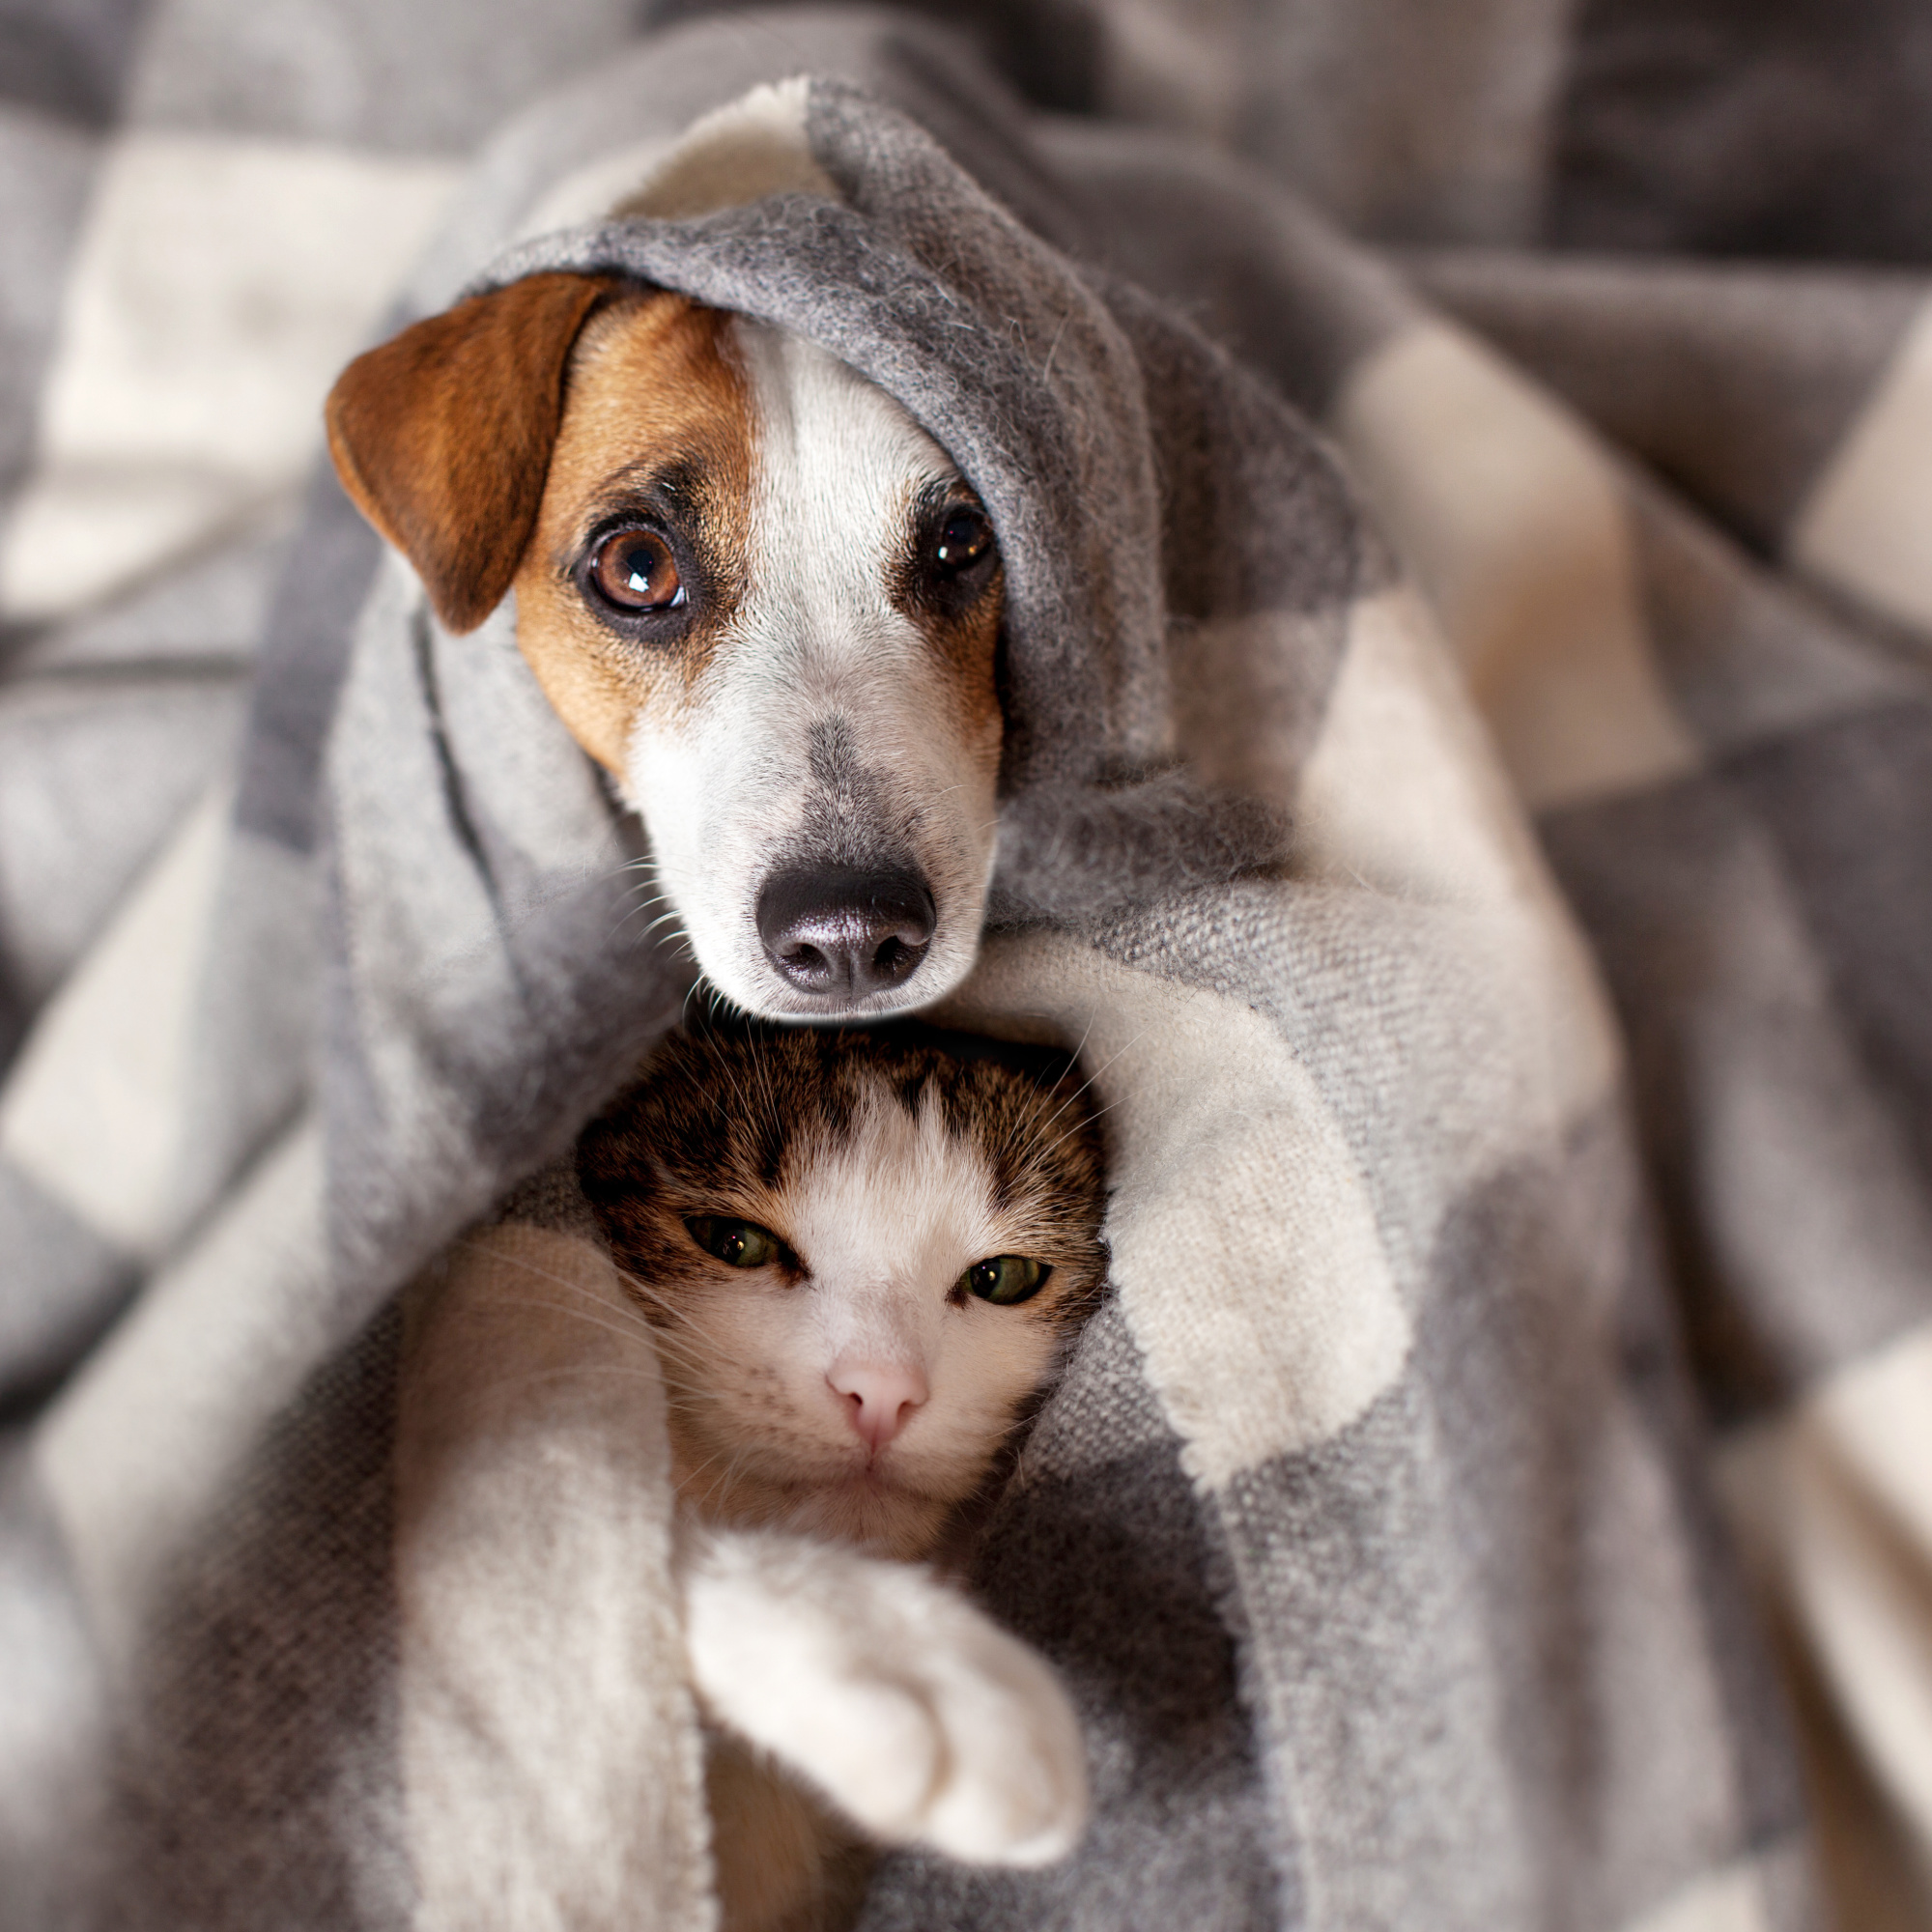 5 Tips To Keep Your Pets Healthy This Winter